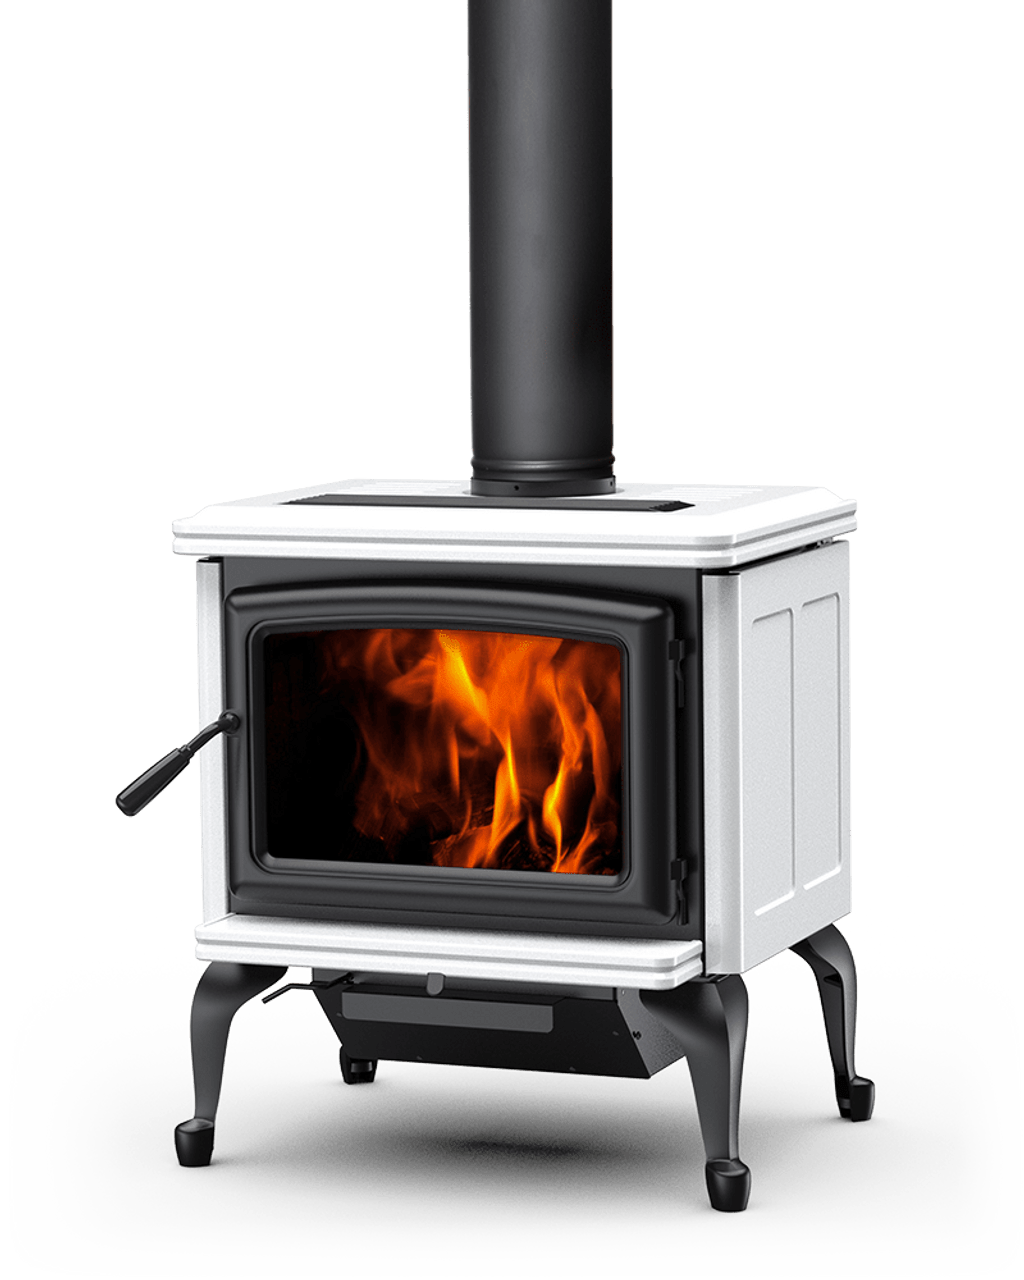 Pacific Energy Super Classic LE Wood Stove